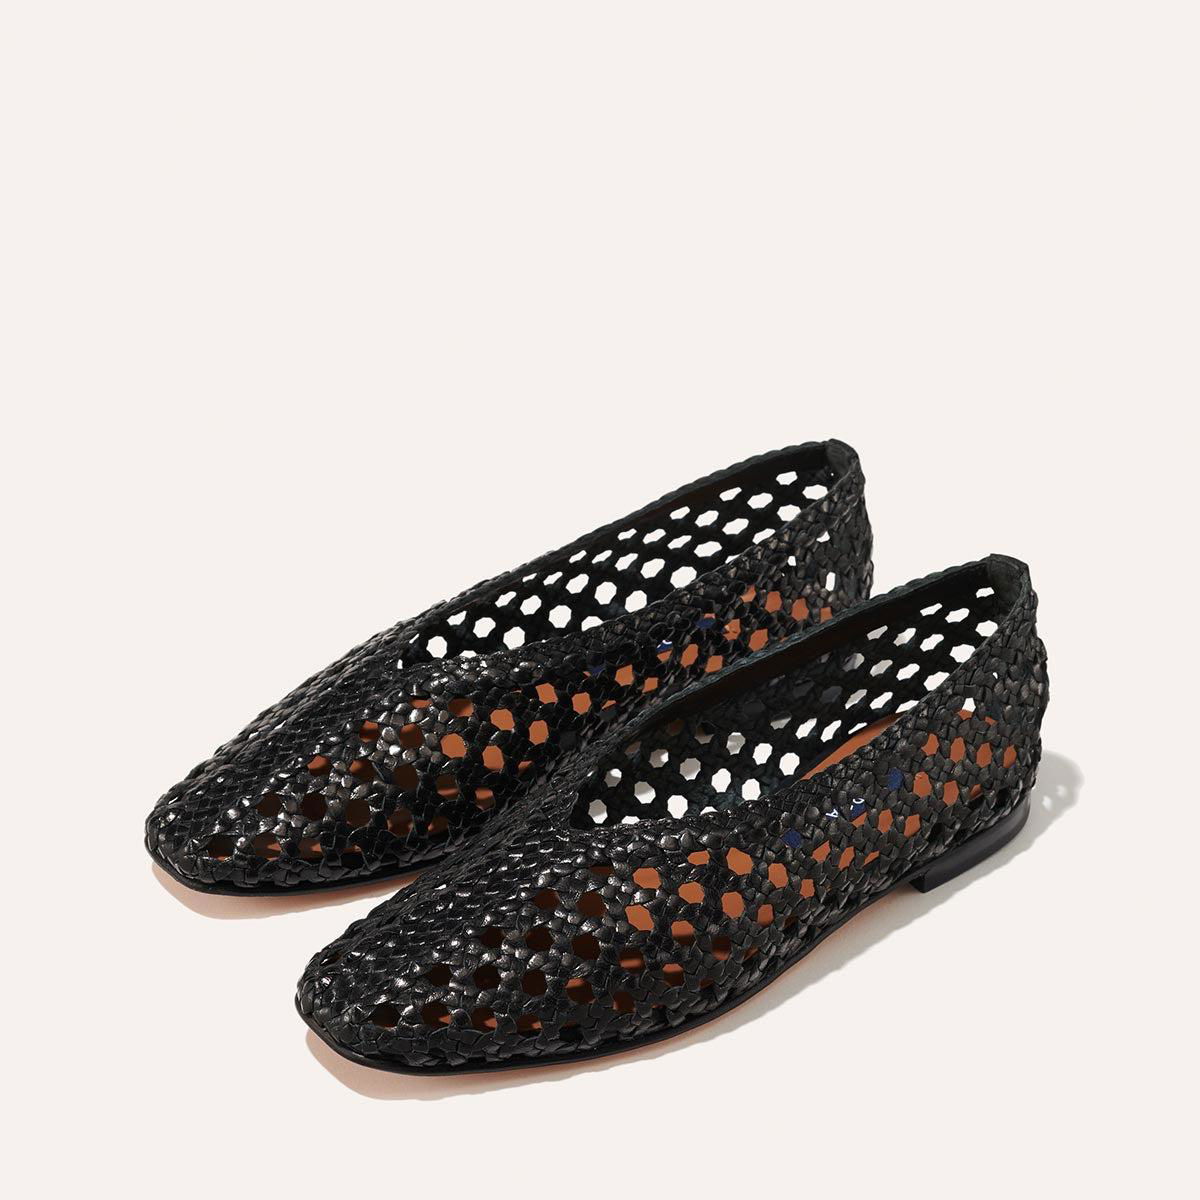 The Woven Paz - Black Leather by MARGAUX